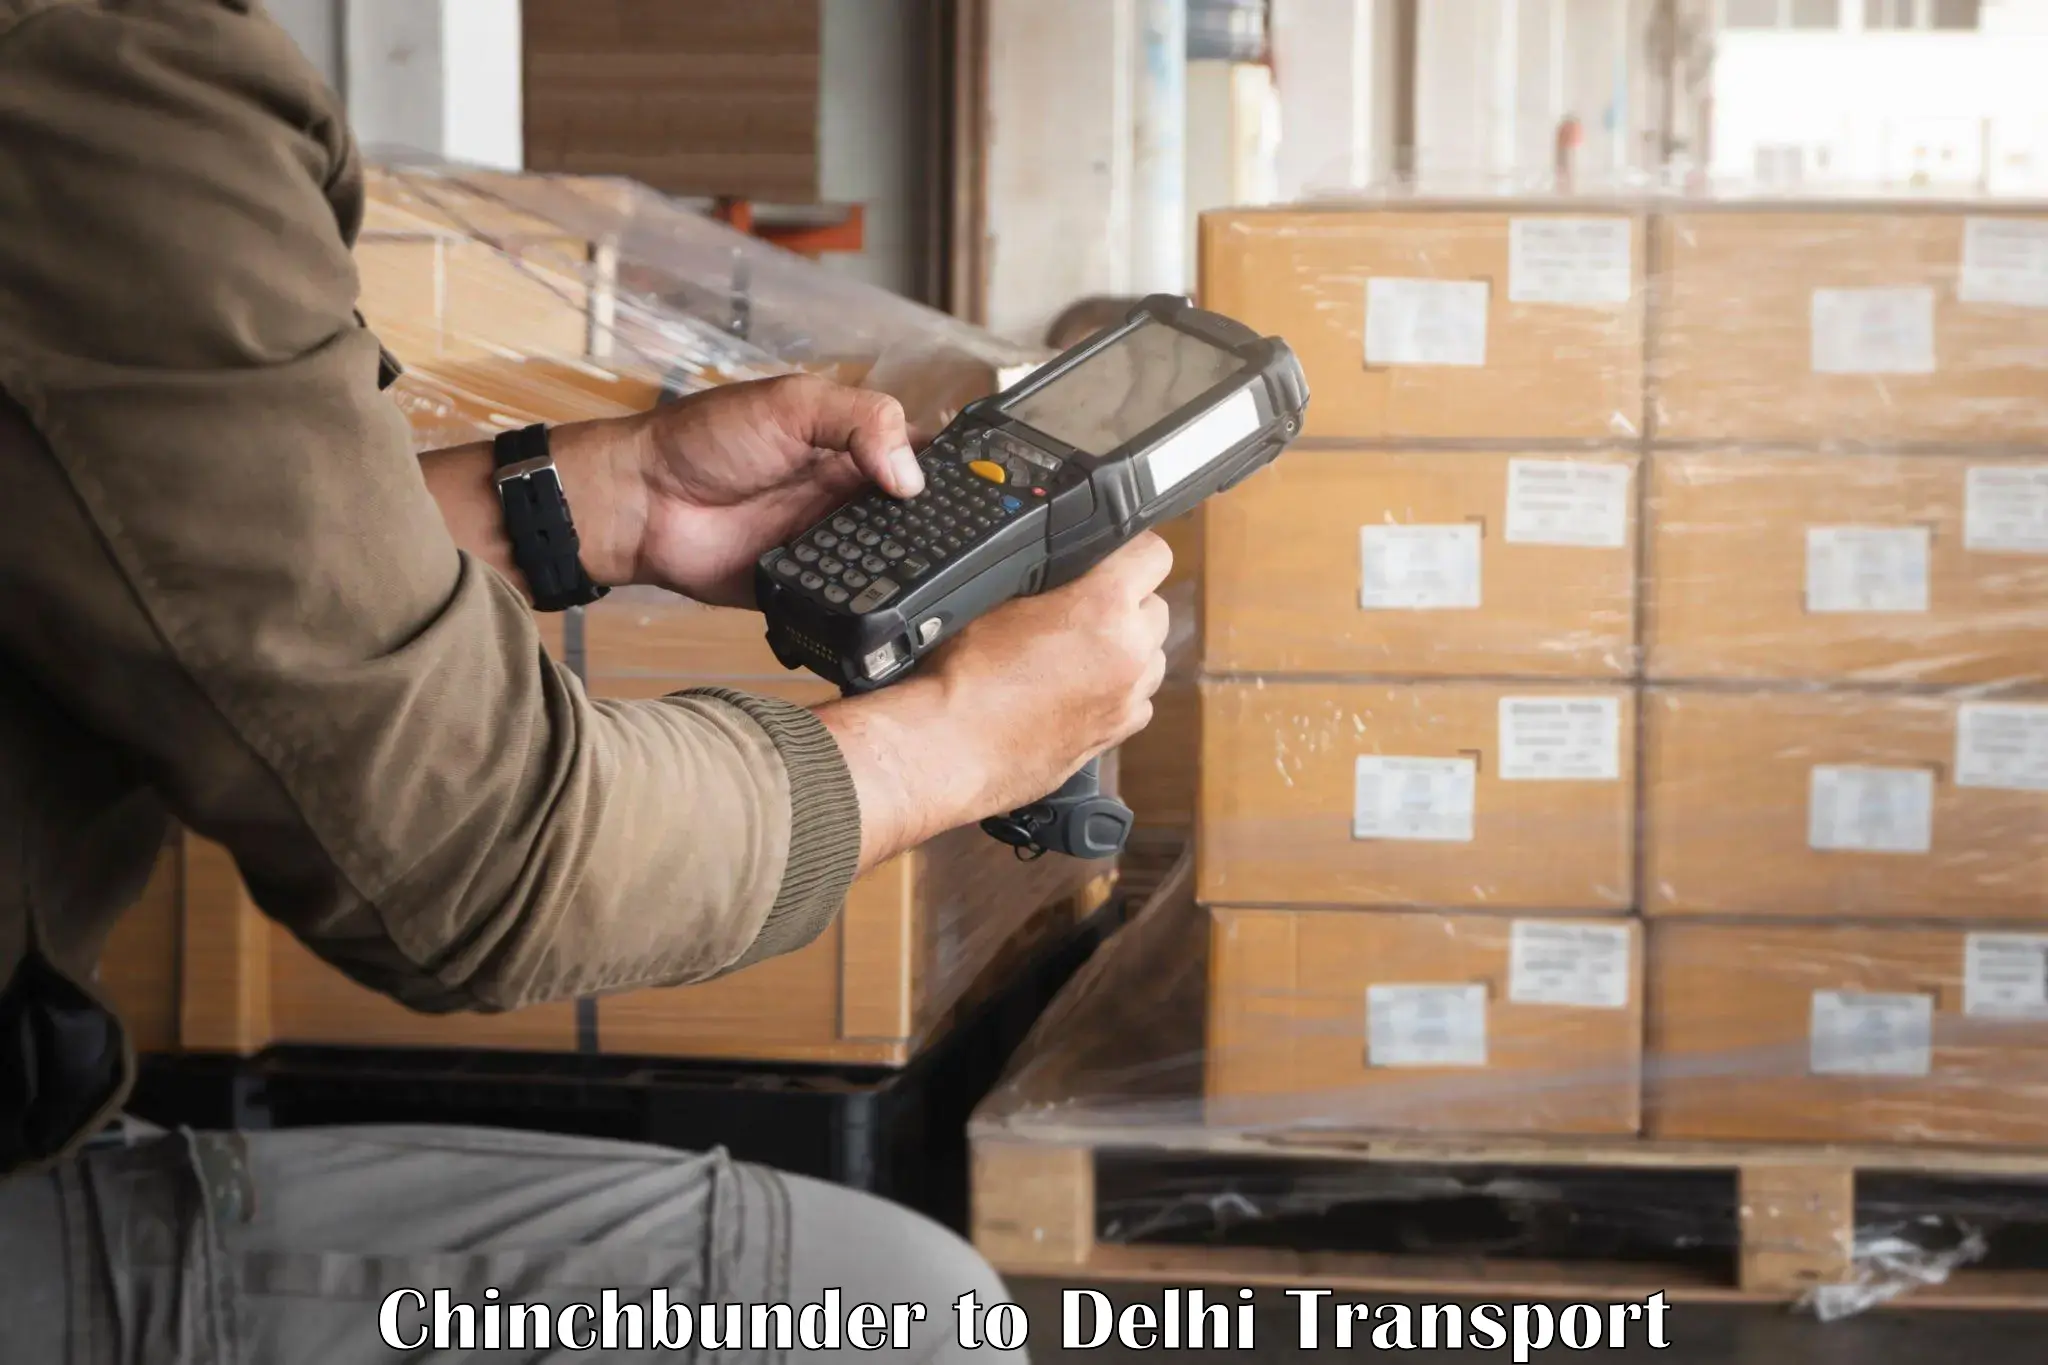 Truck transport companies in India Chinchbunder to NCR